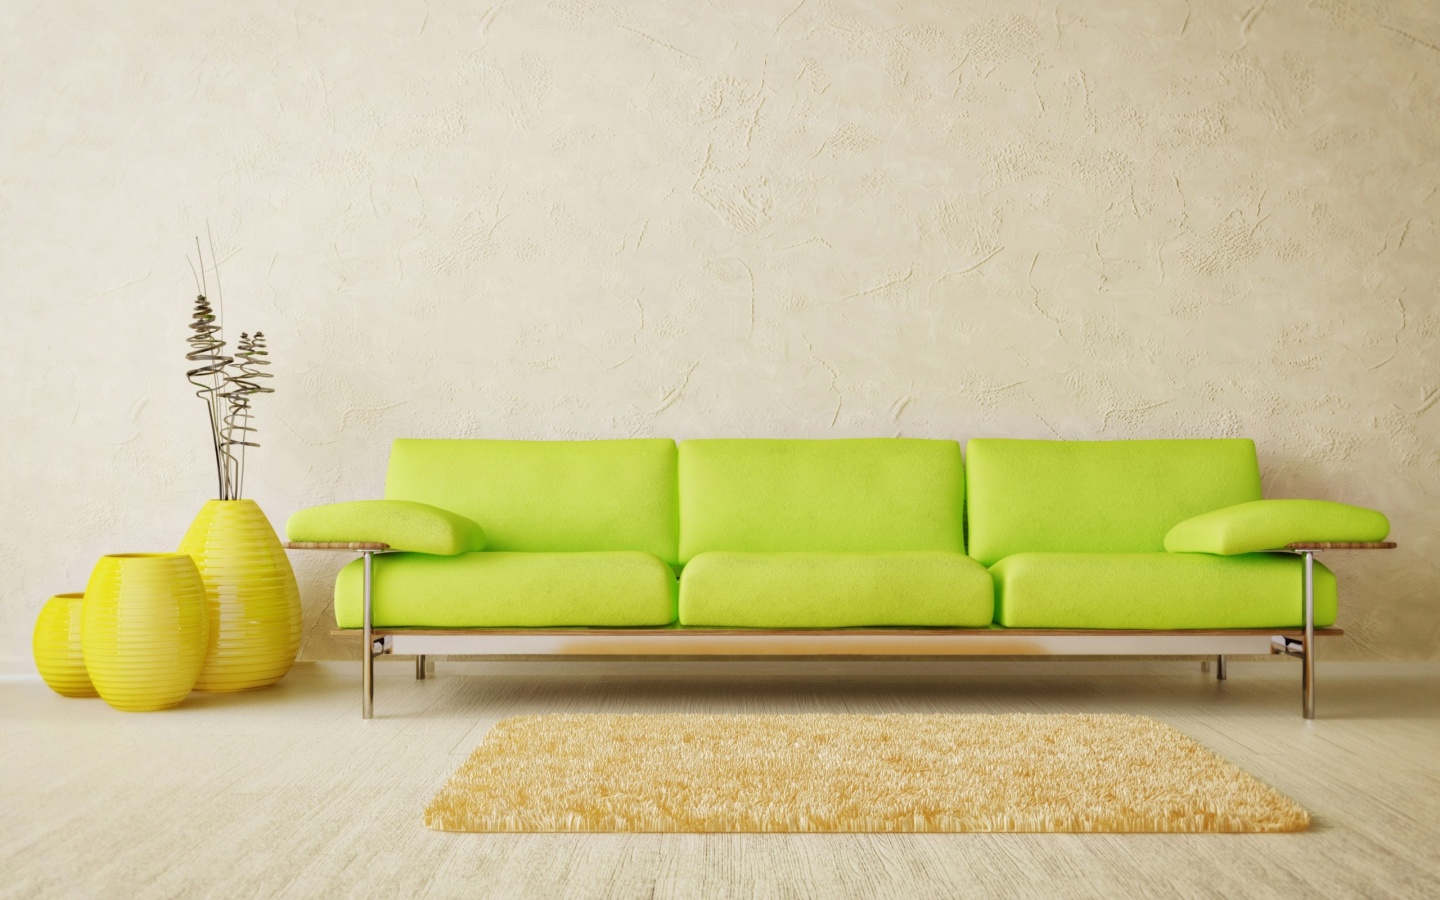 Green Sofa And Yellow Carpet In Room